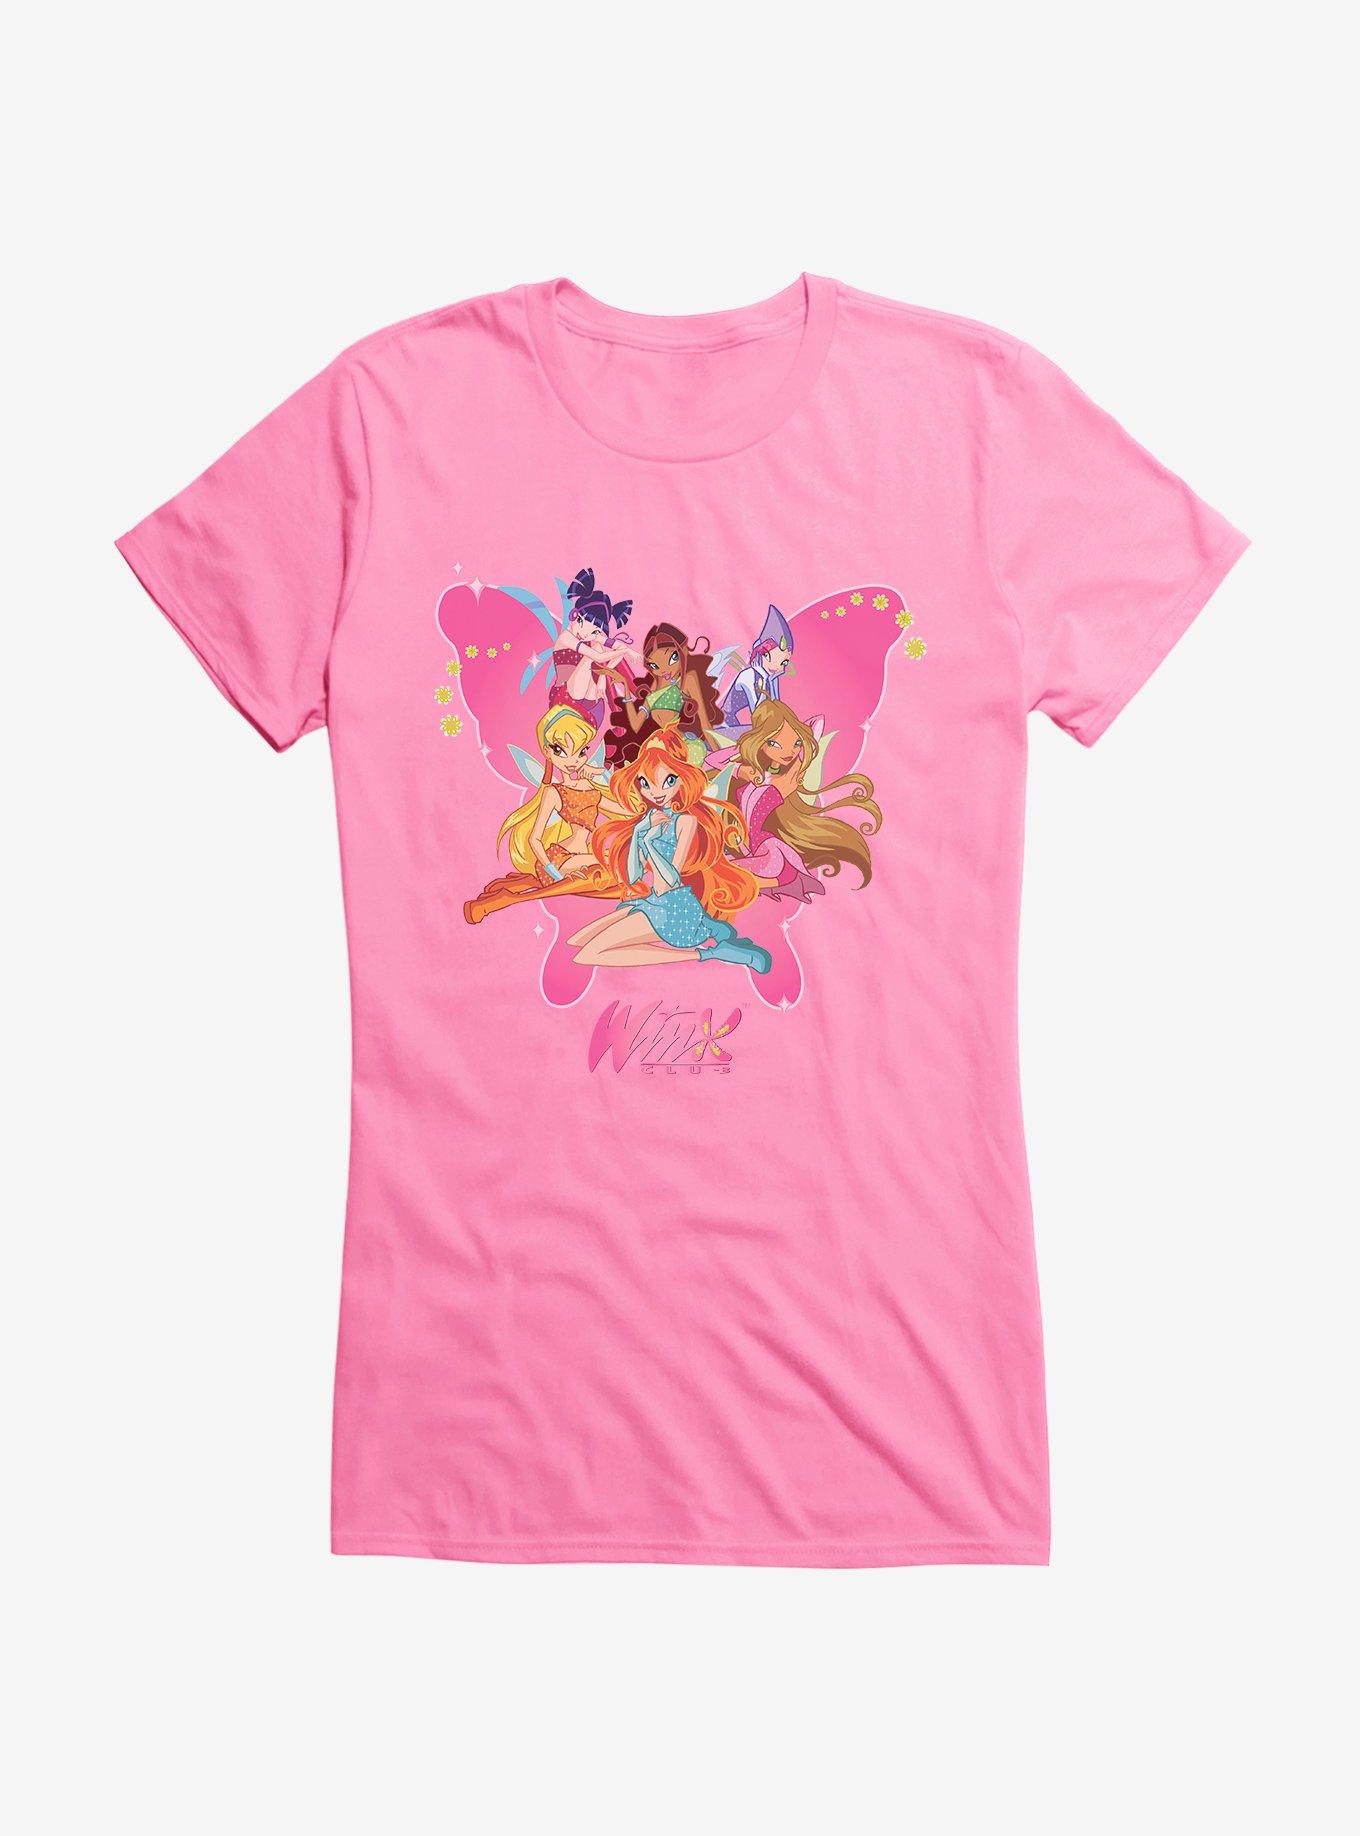 Winx Club Join The Butterfly Girls T-Shirt